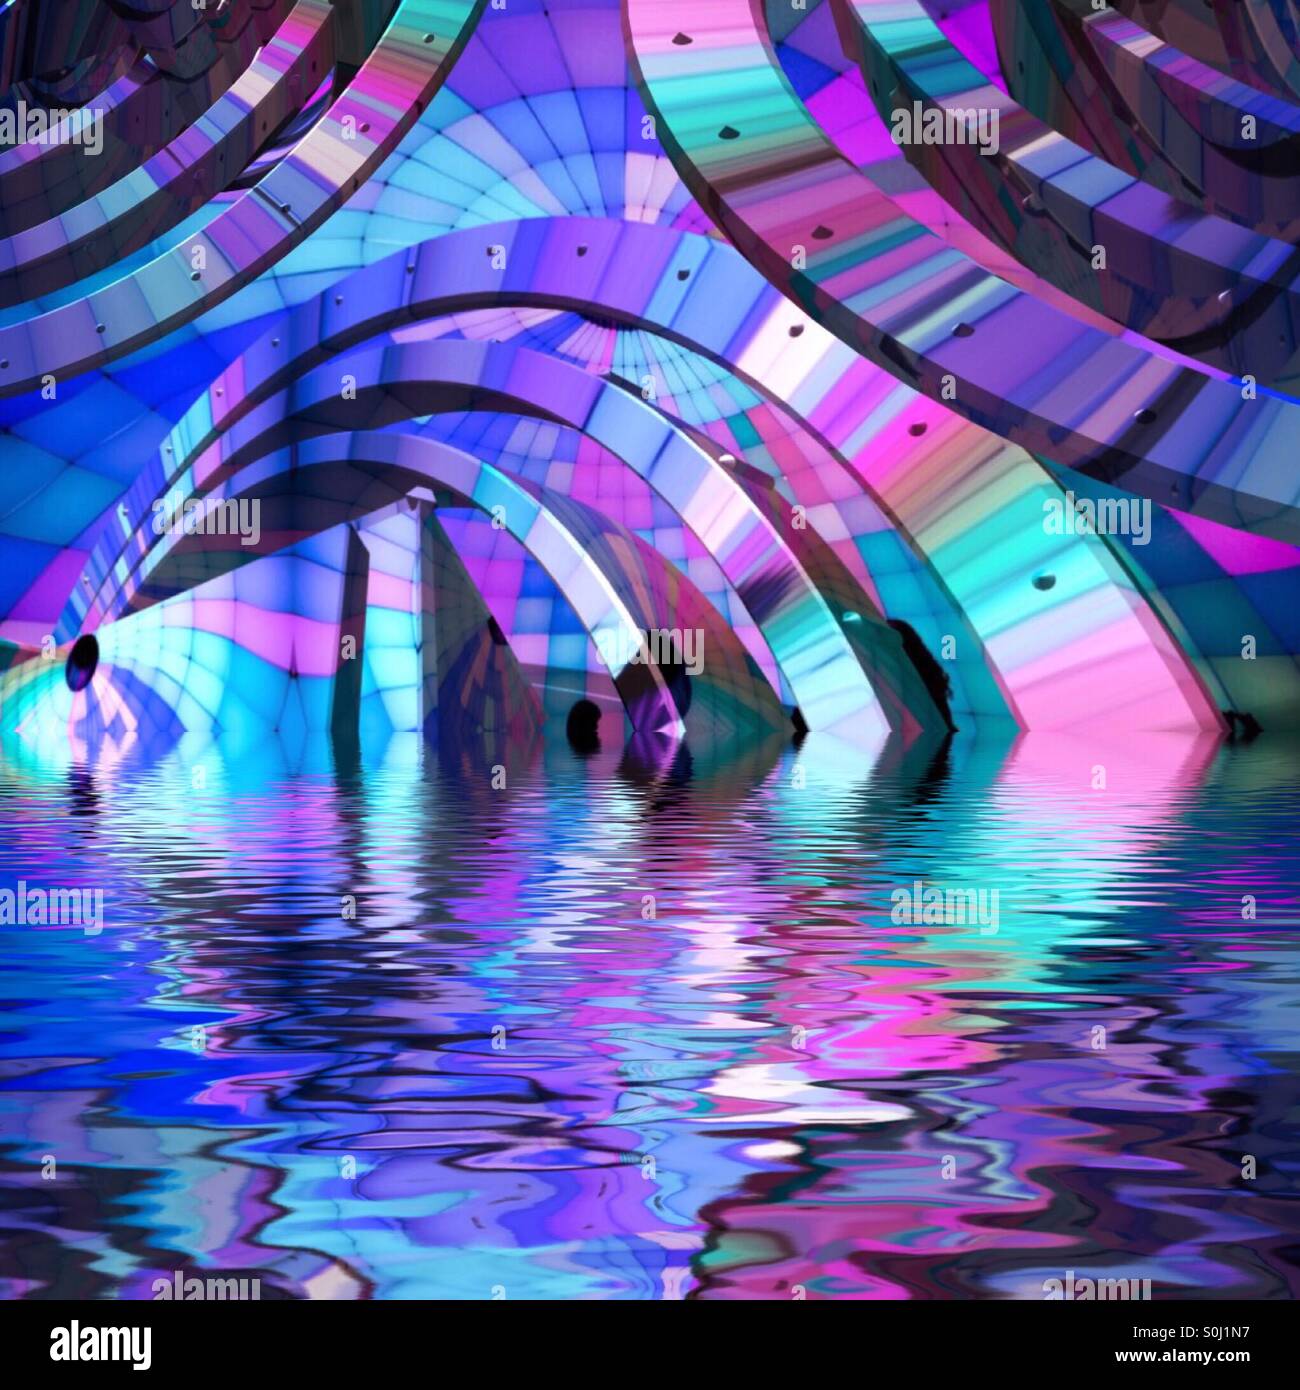 An abstract image of blue, pink, purple and Aqua curved shapes reflecting in water. Stock Photo